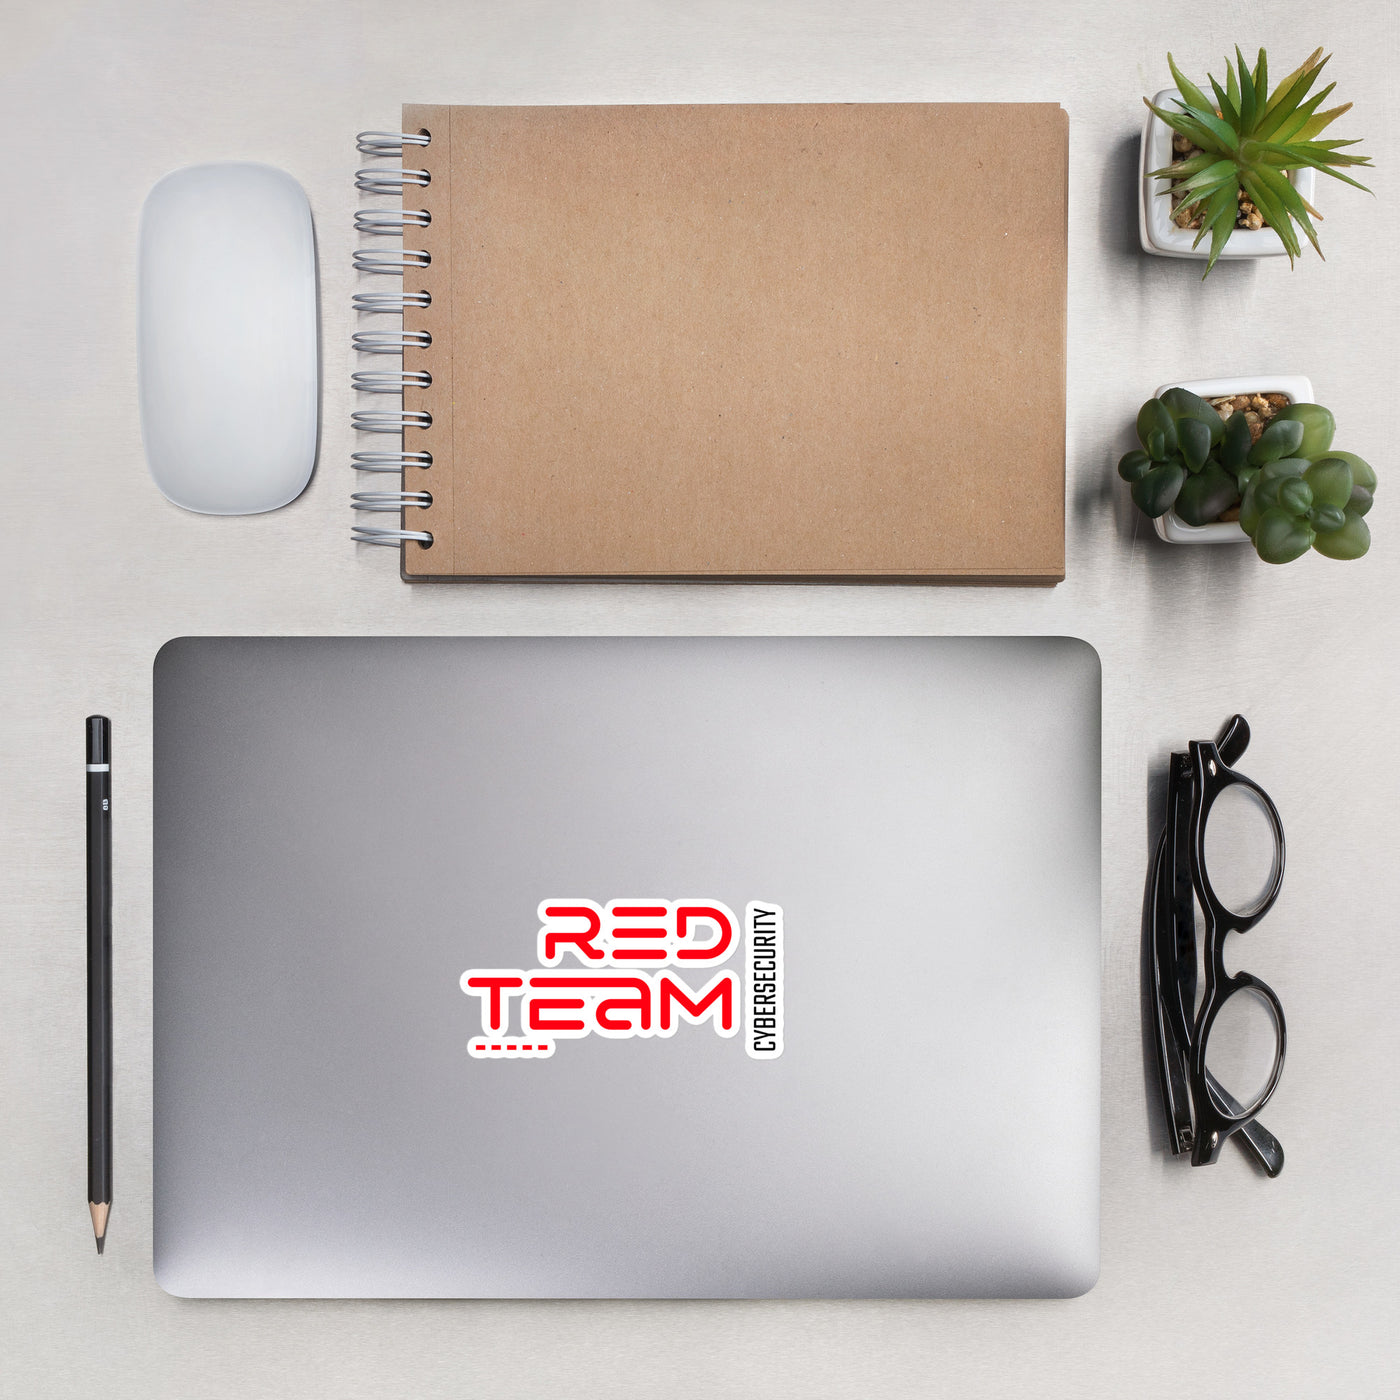 Cyber Security Red Team V11 - Bubble-free stickers